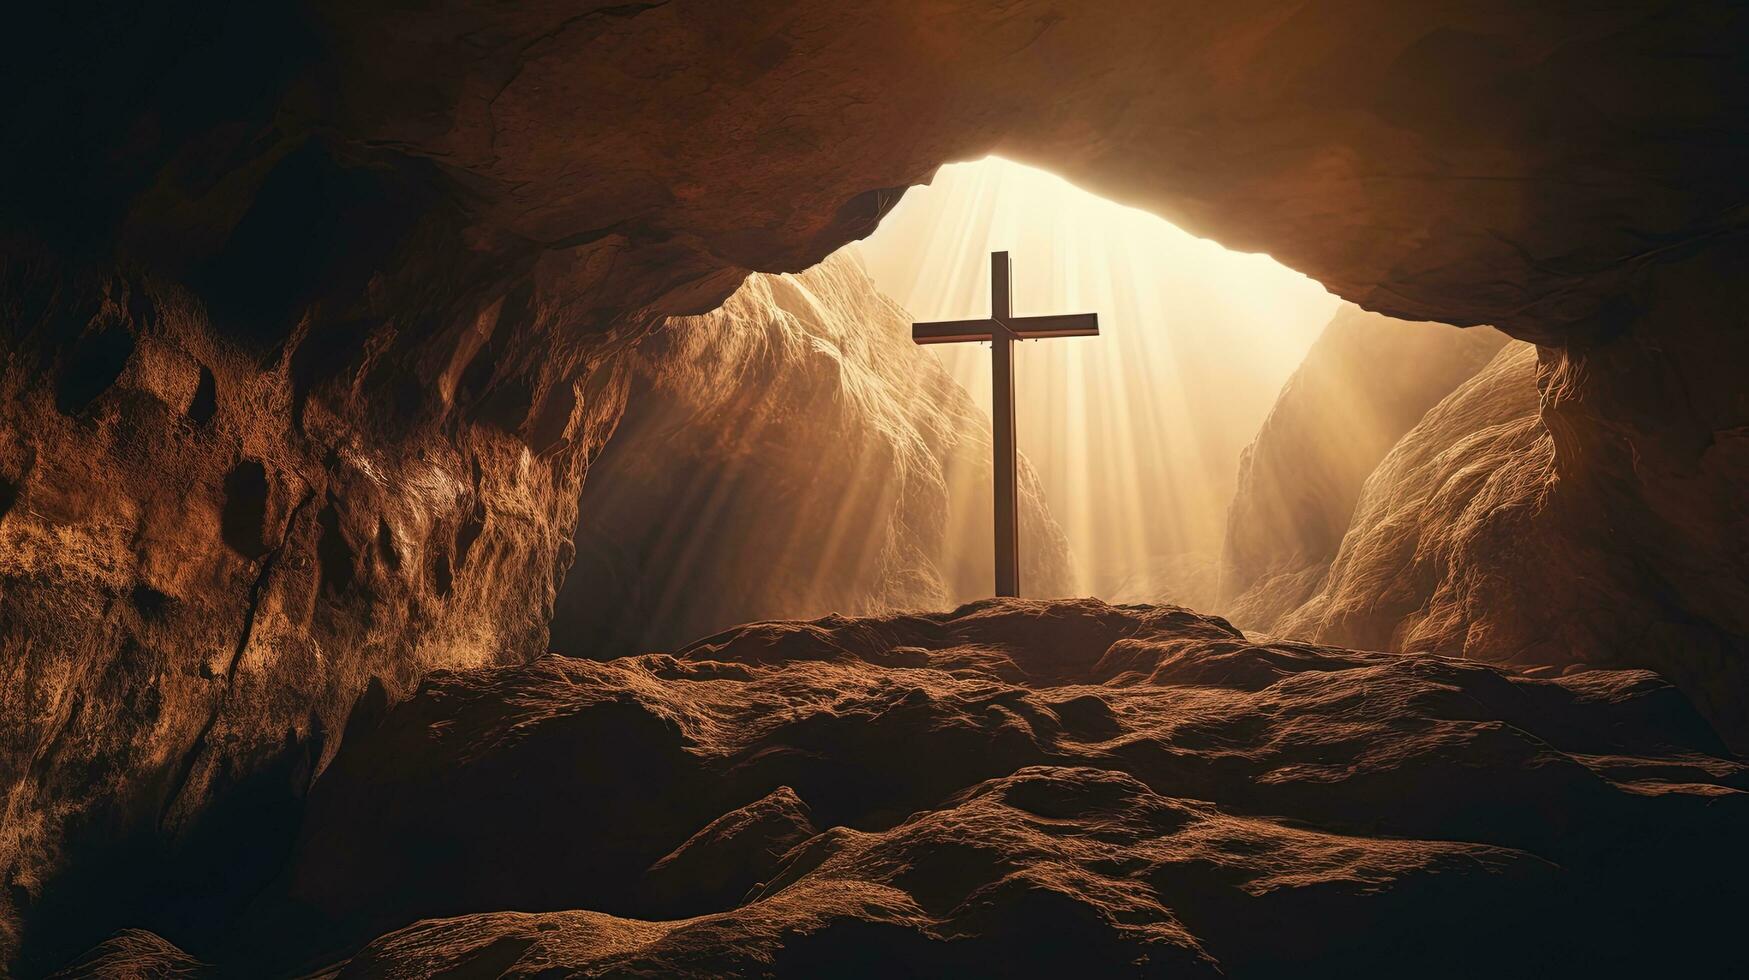 The burial spot of Jesus after crucifixion and the Christian belief of resurrection Crucifixion on hills according to the Bible. silhouette concept photo